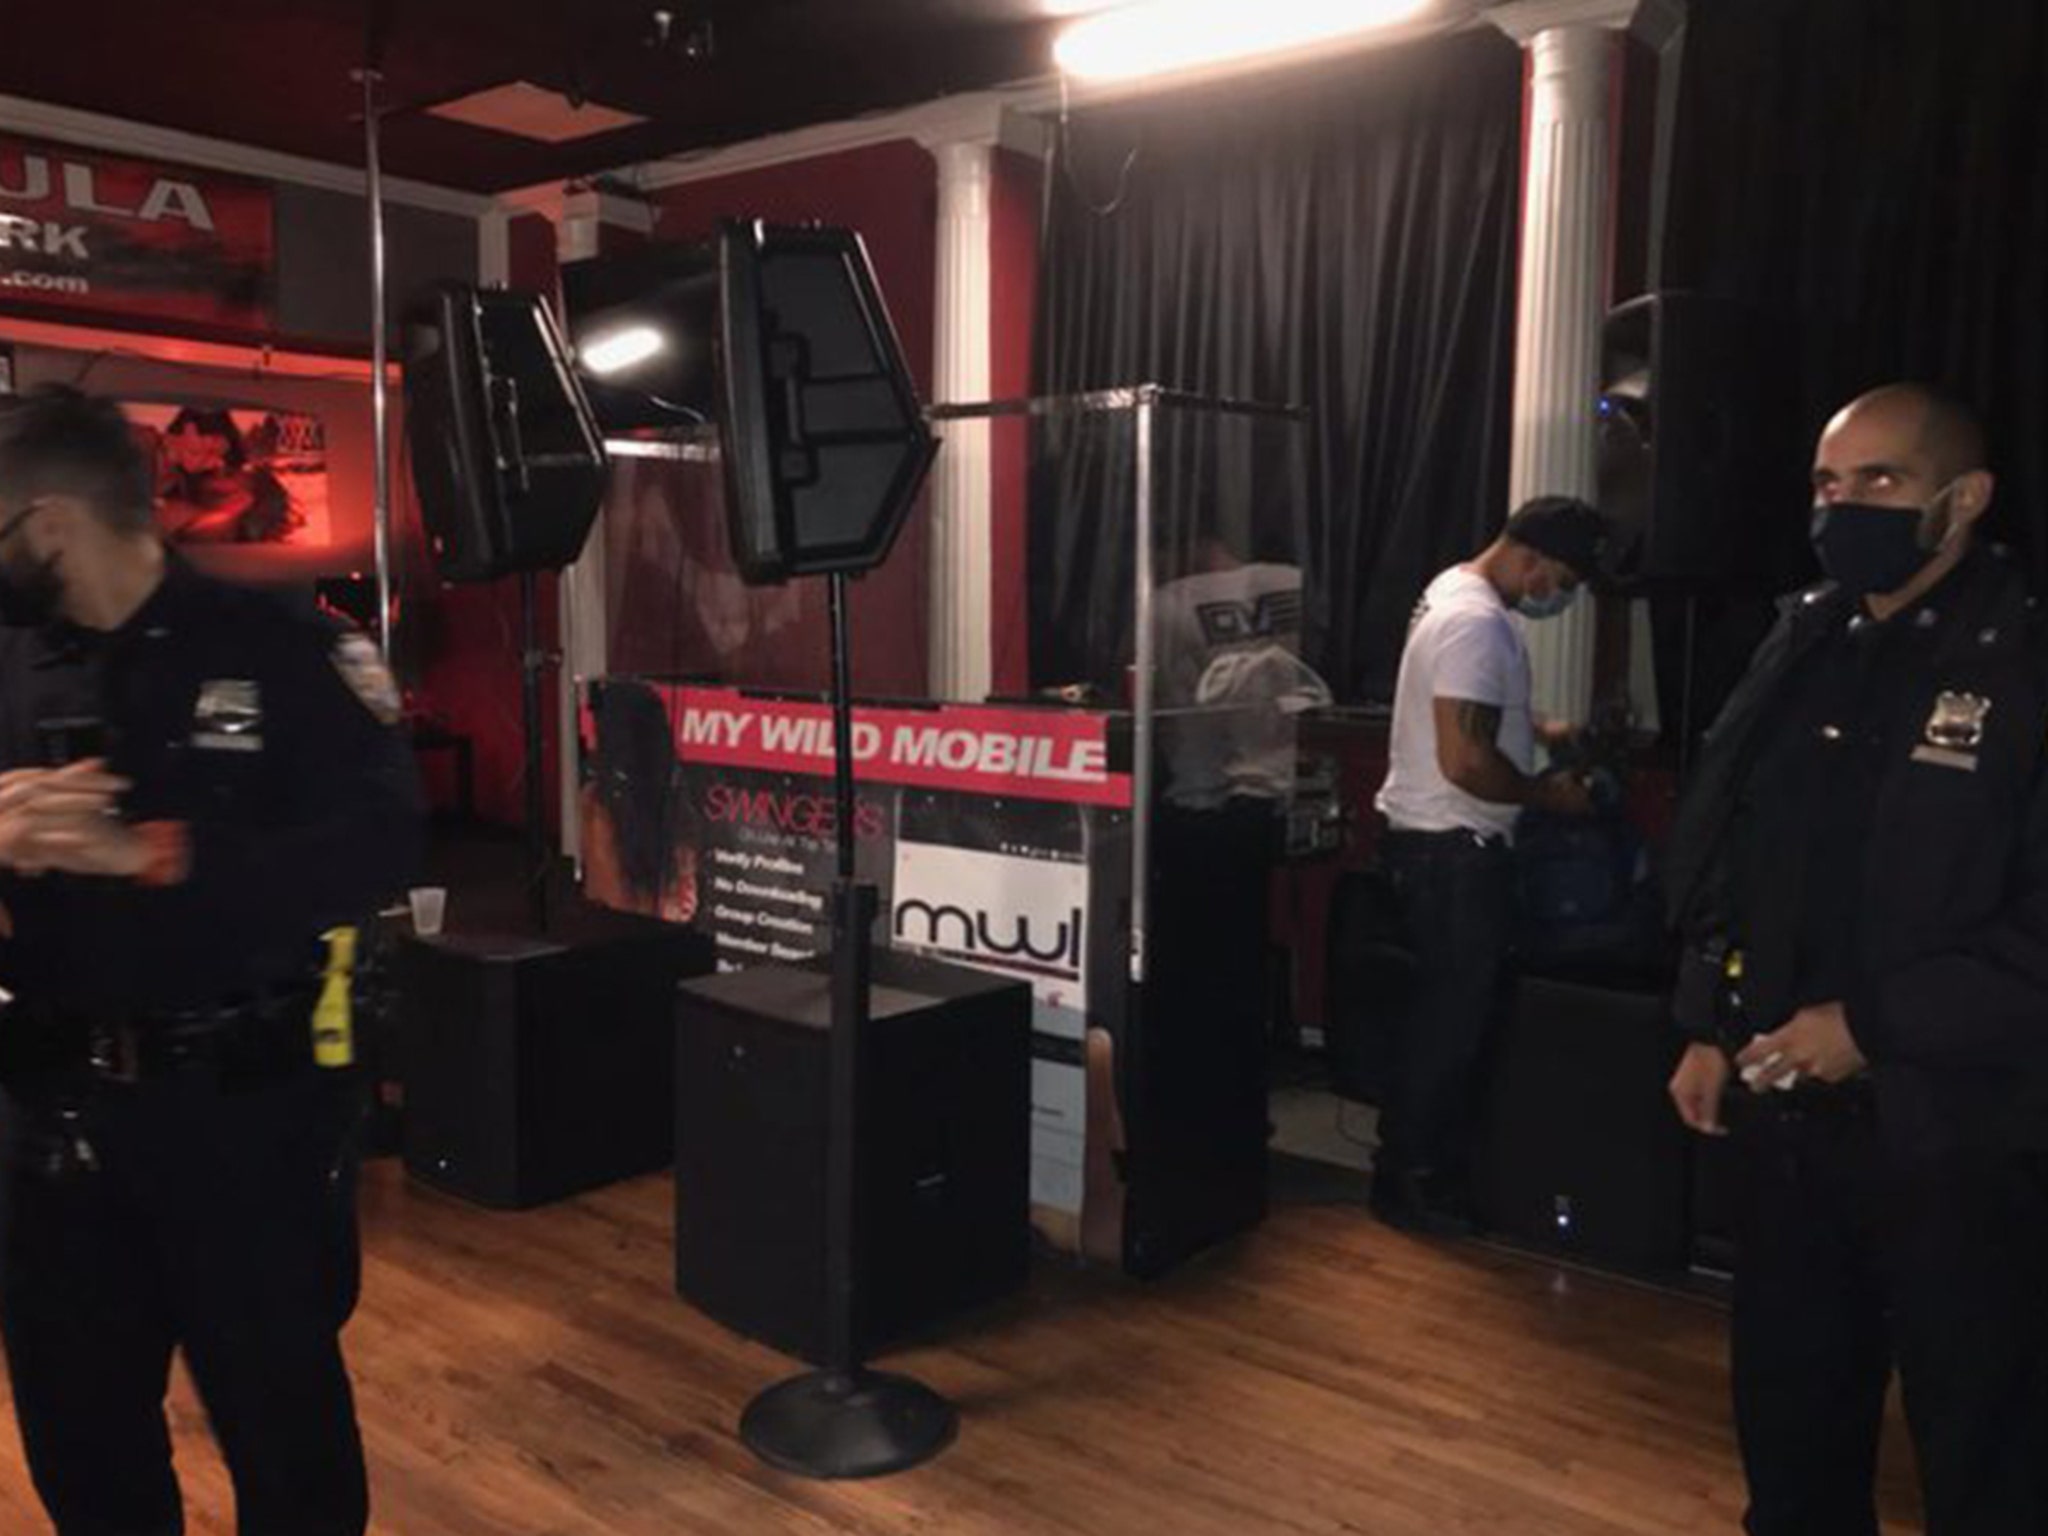 NYC Underground Swingers Party Broken Up By Sheriffs Deputies pic